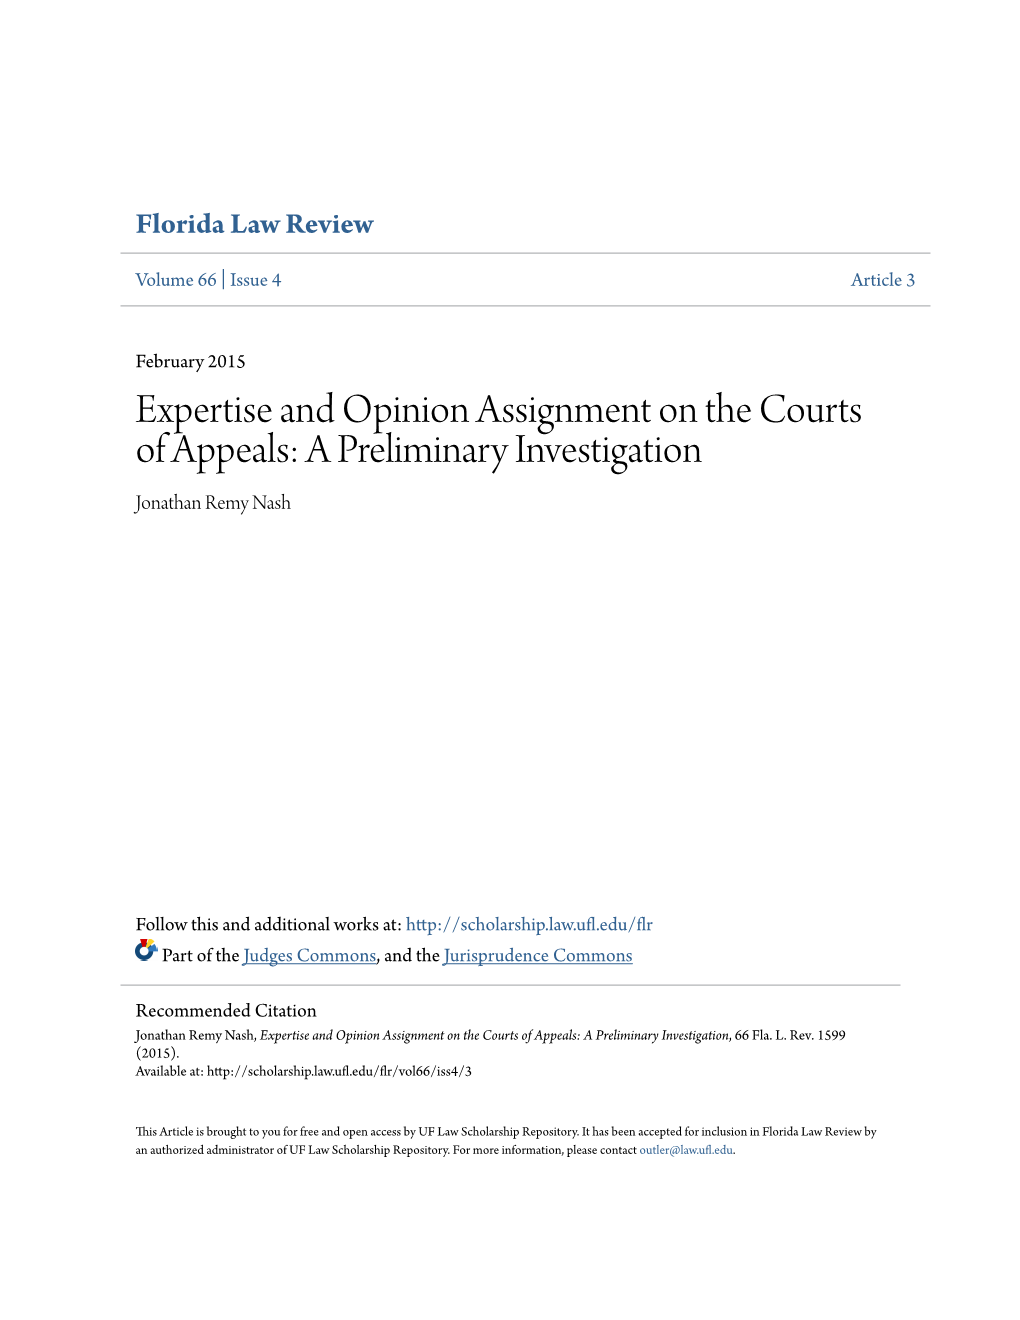 Expertise and Opinion Assignment on the Courts of Appeals: a Preliminary Investigation Jonathan Remy Nash